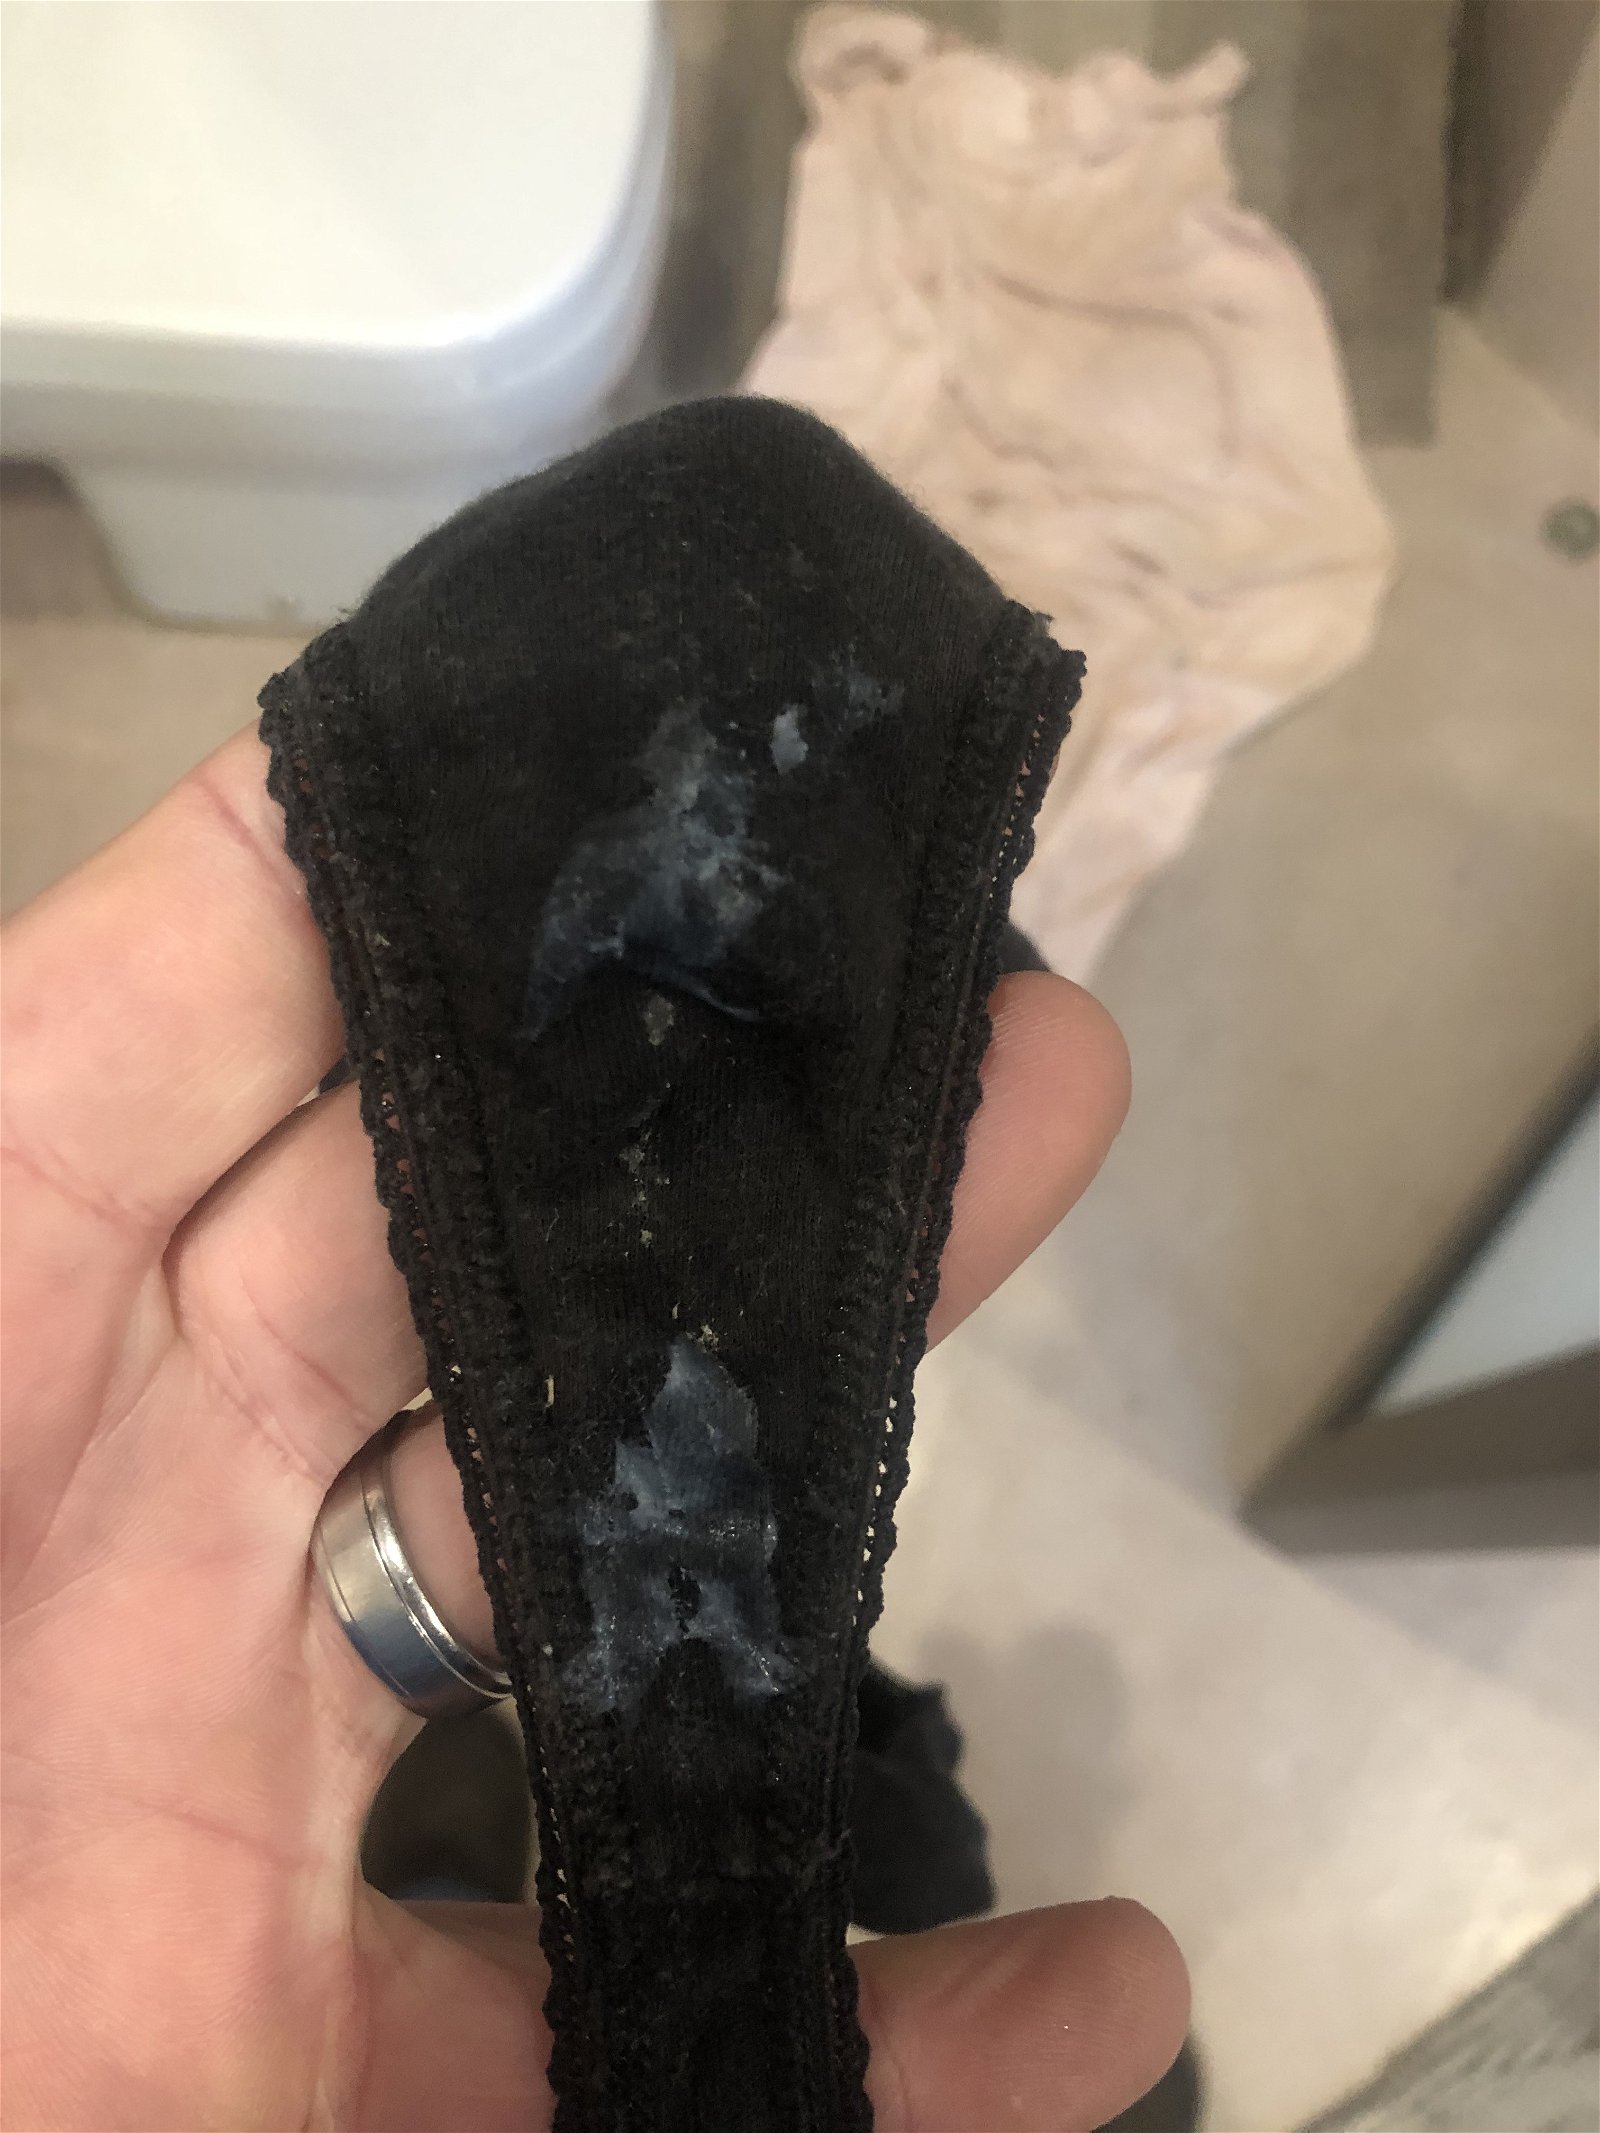 Photo by Cheatingwife101 with the username @Jkd082,  July 11, 2019 at 11:35 PM. The post is about the topic Cum panties and the text says 'Wifes panties for a day, normal or cum??'